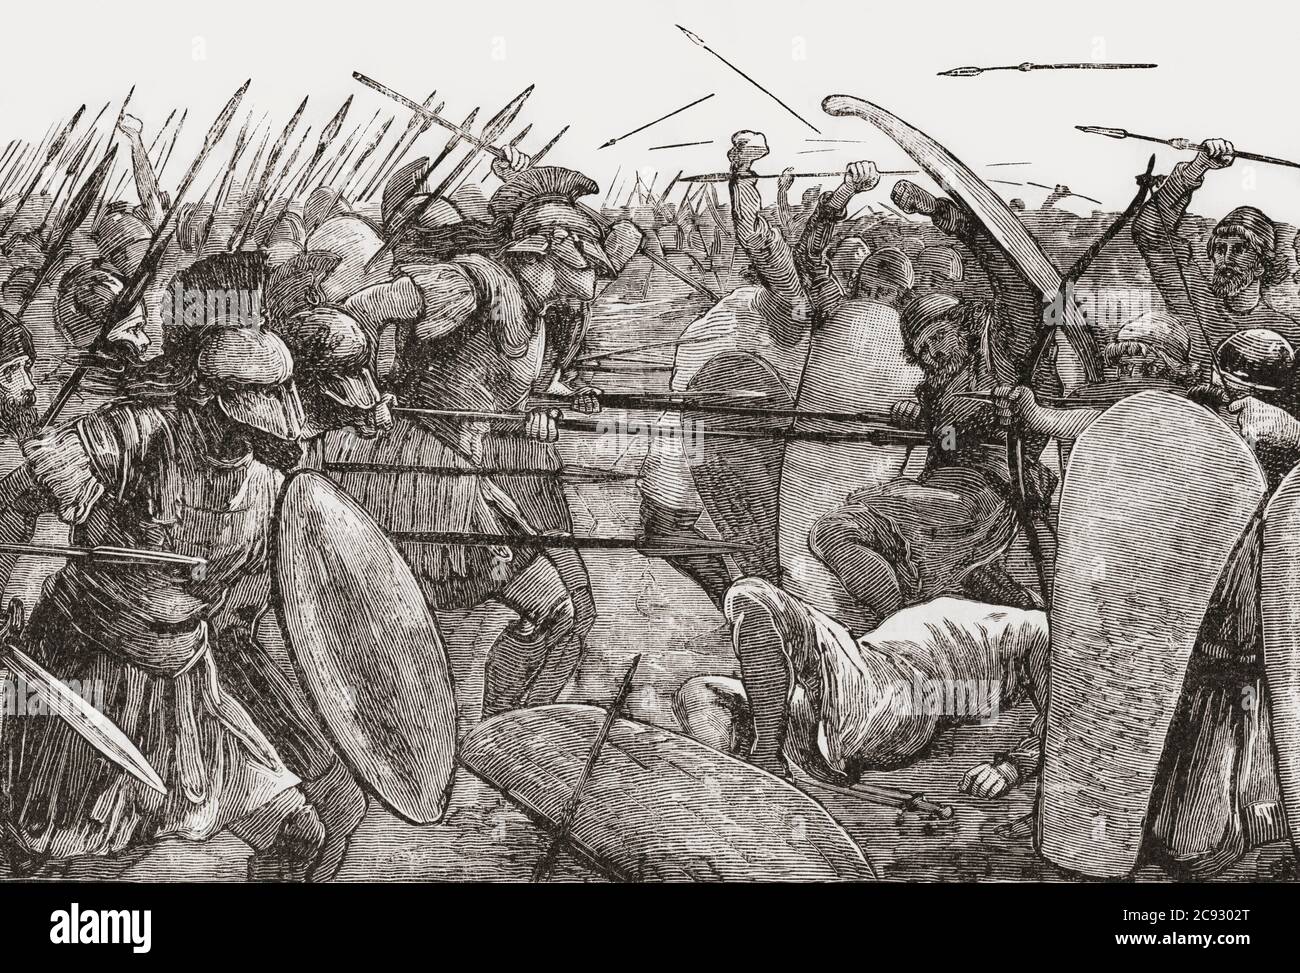 The Battle of Plataea, 479 BC, in which the defeat of the invasion forces of Xerxes was the final land battle of the second Persian invasion of Greece.  In the picture Spartan troops confront the Persians. The Spartan contingent was part of an alliance of Greek city-states which formed the Greek army.  After an illustration by an unidentified artist in the Cyclopaedia of Universal History, published in Cincinnati in the 1880’s. Stock Photo